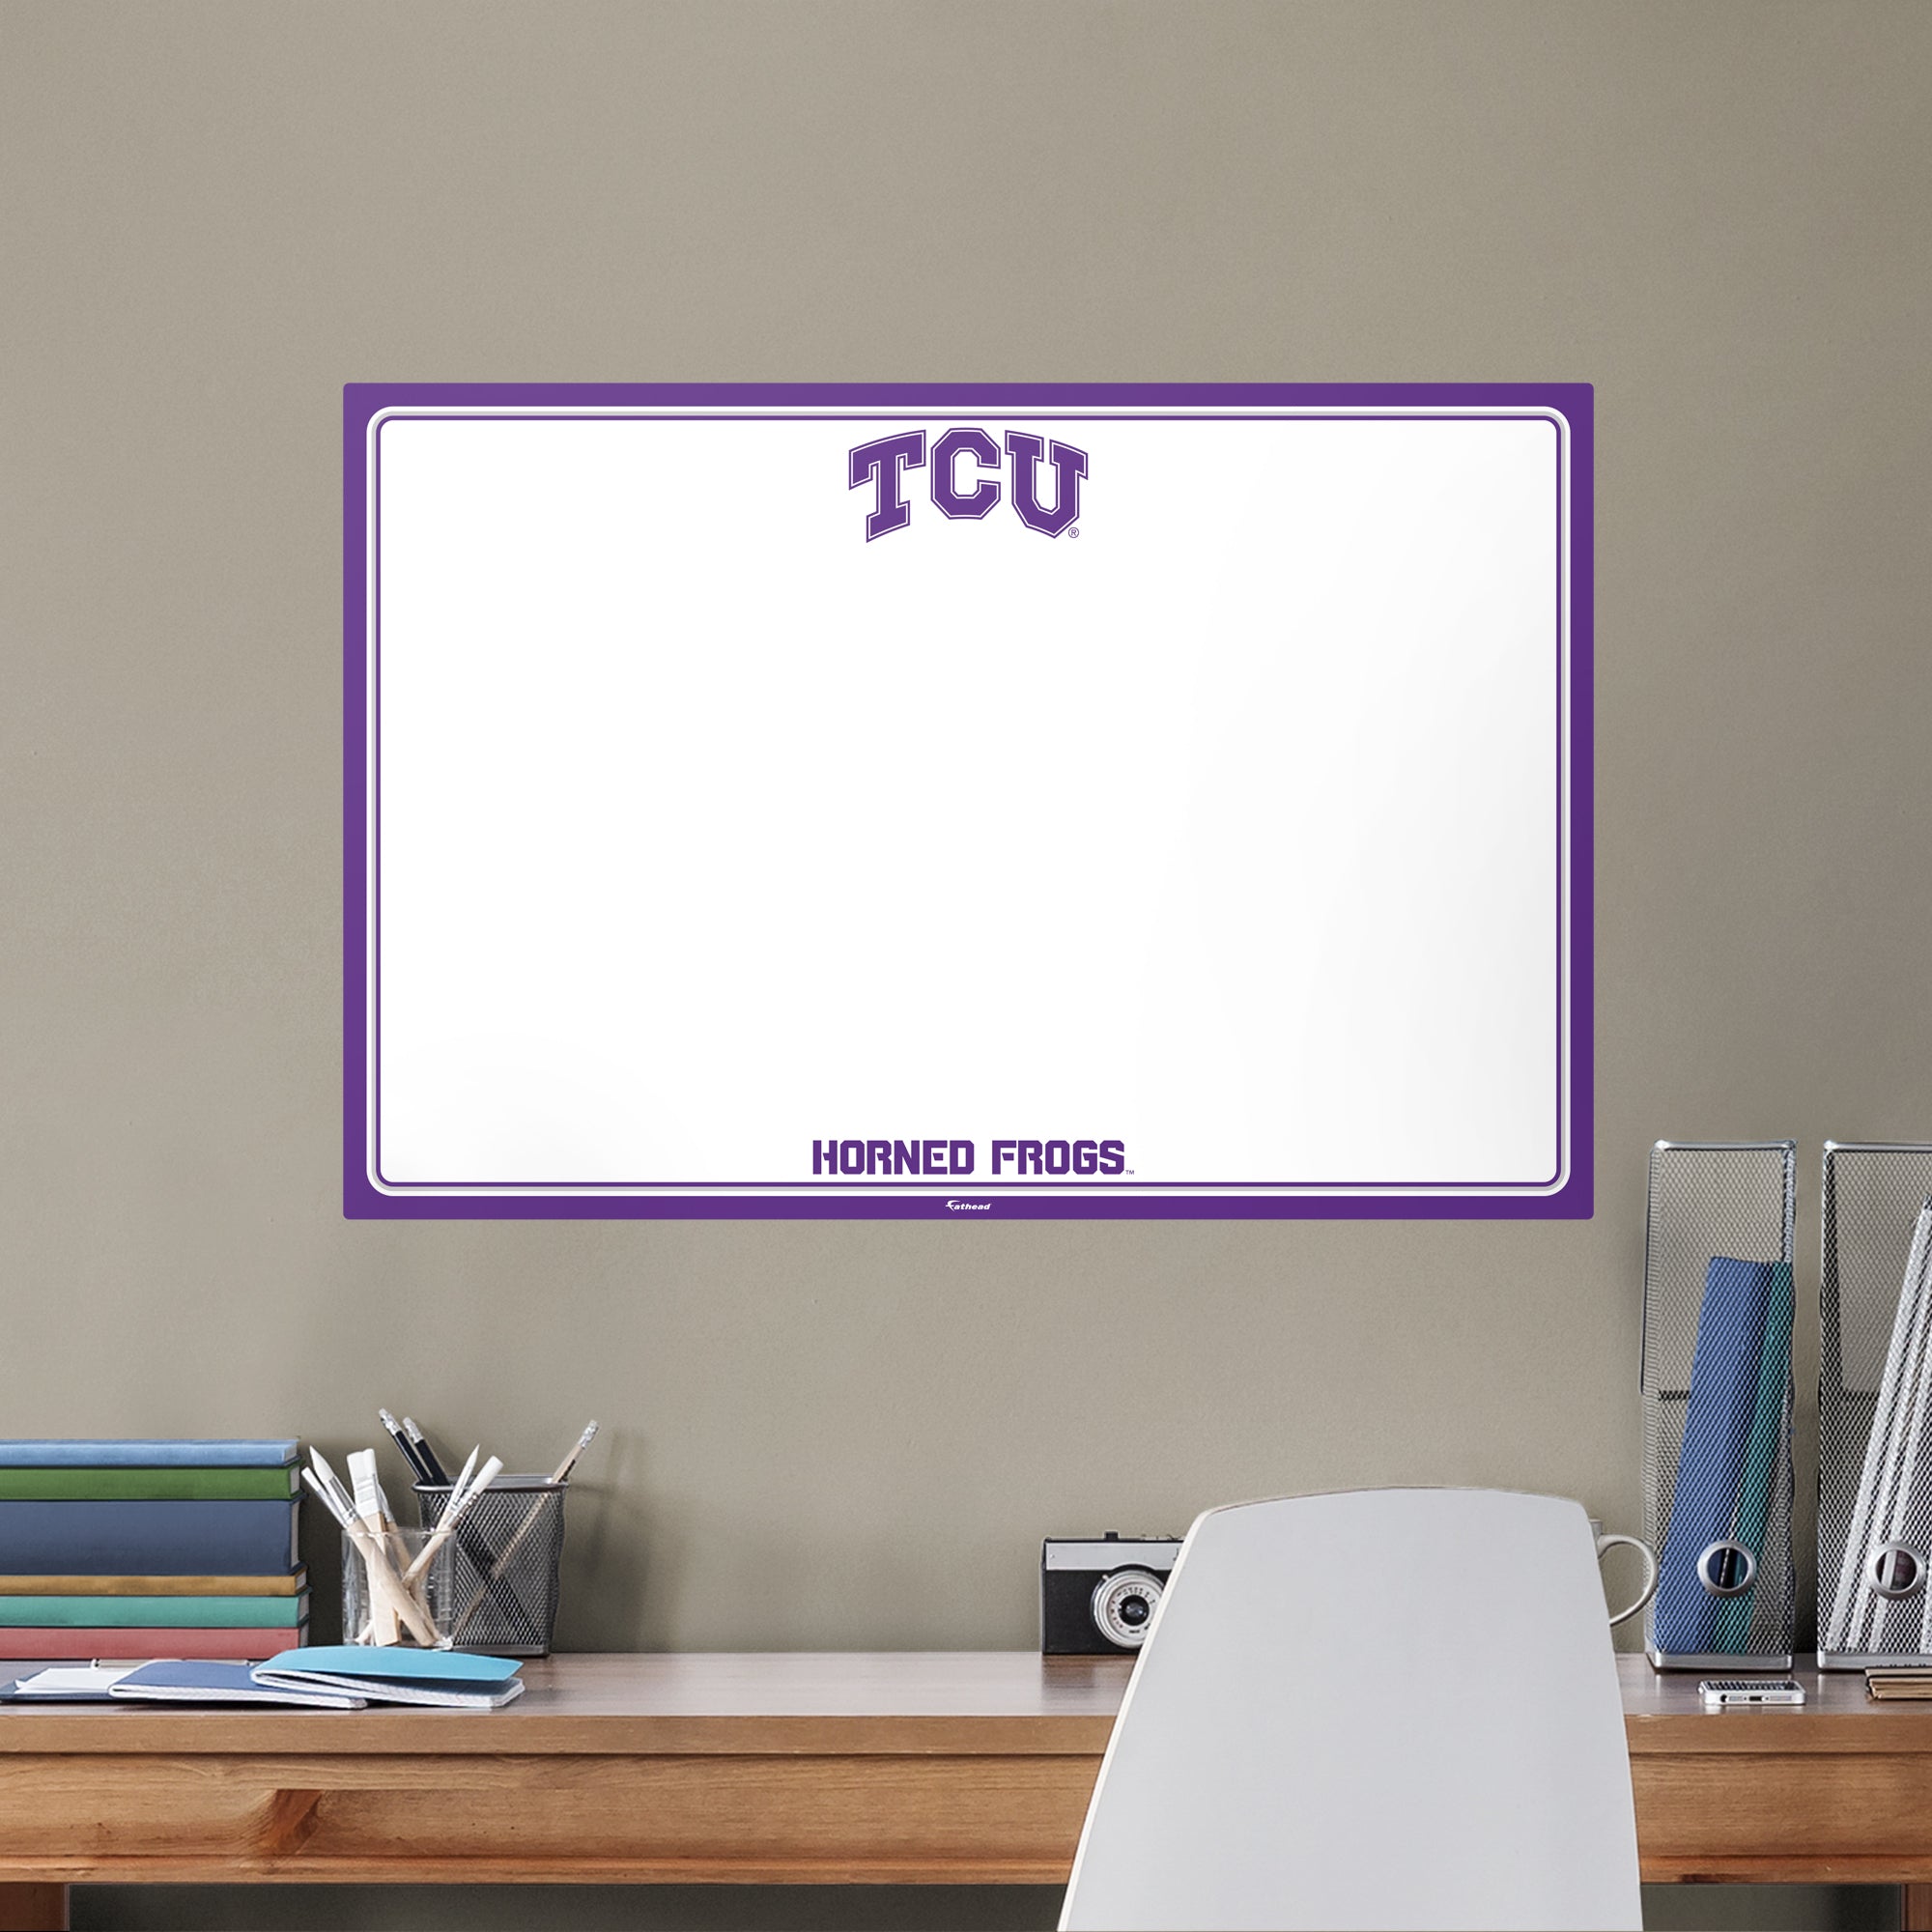 TCU Horned Frogs: Dry Erase Whiteboard - X-Large Officially Licensed NCAA Removable Wall Decal XL by Fathead | Vinyl